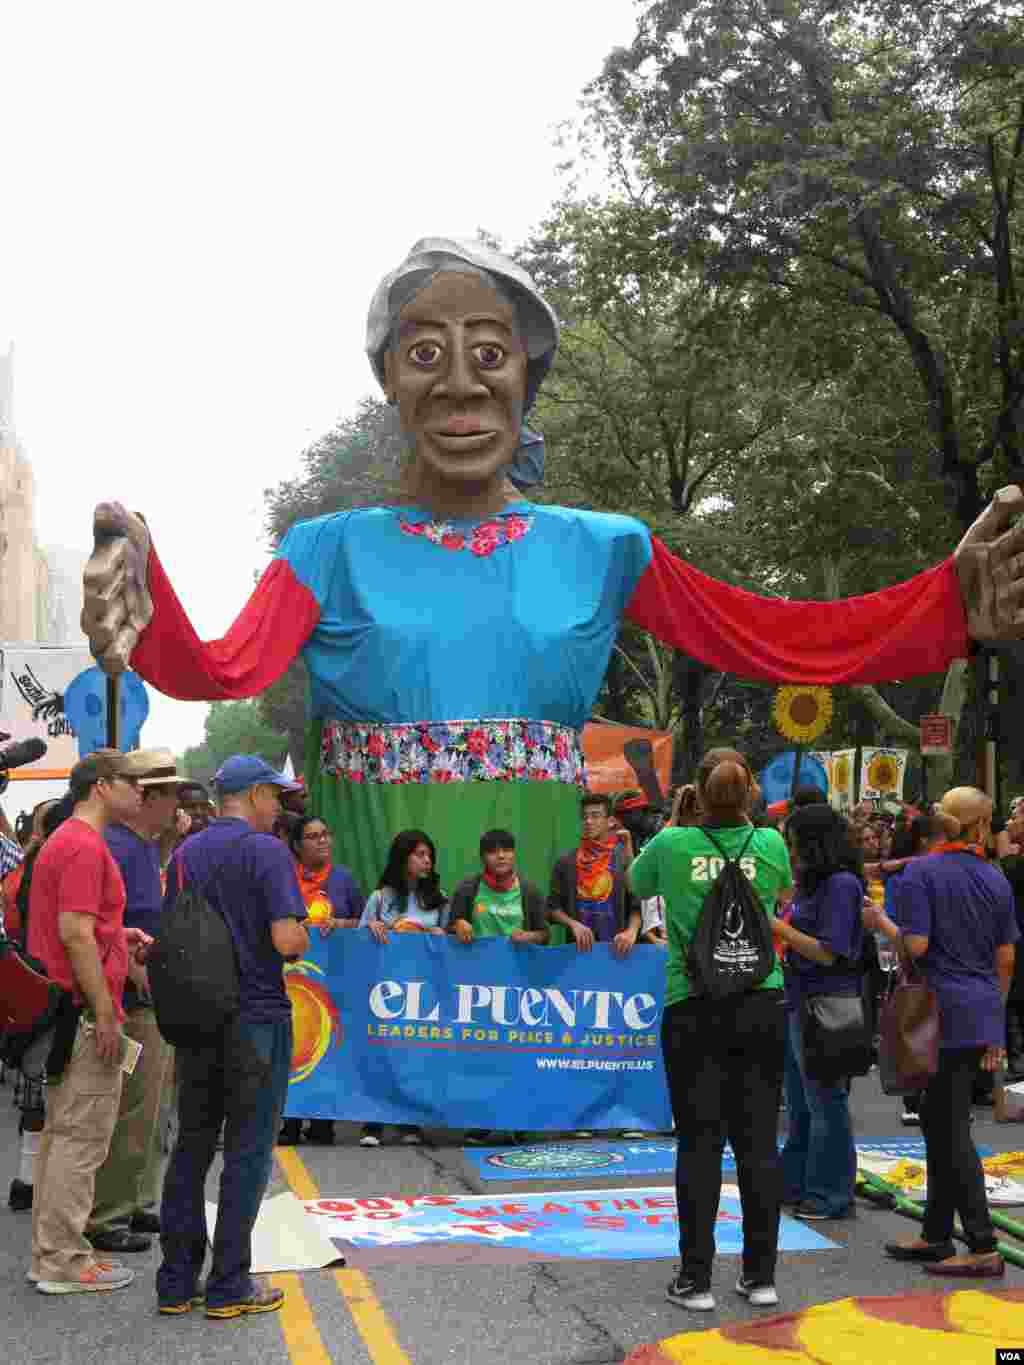 Part parade, part protest, colorful floats lined the route from Central Park to the United Nations in New York, Sept. 21, 2014. (Rosanne Skirble/VOA)